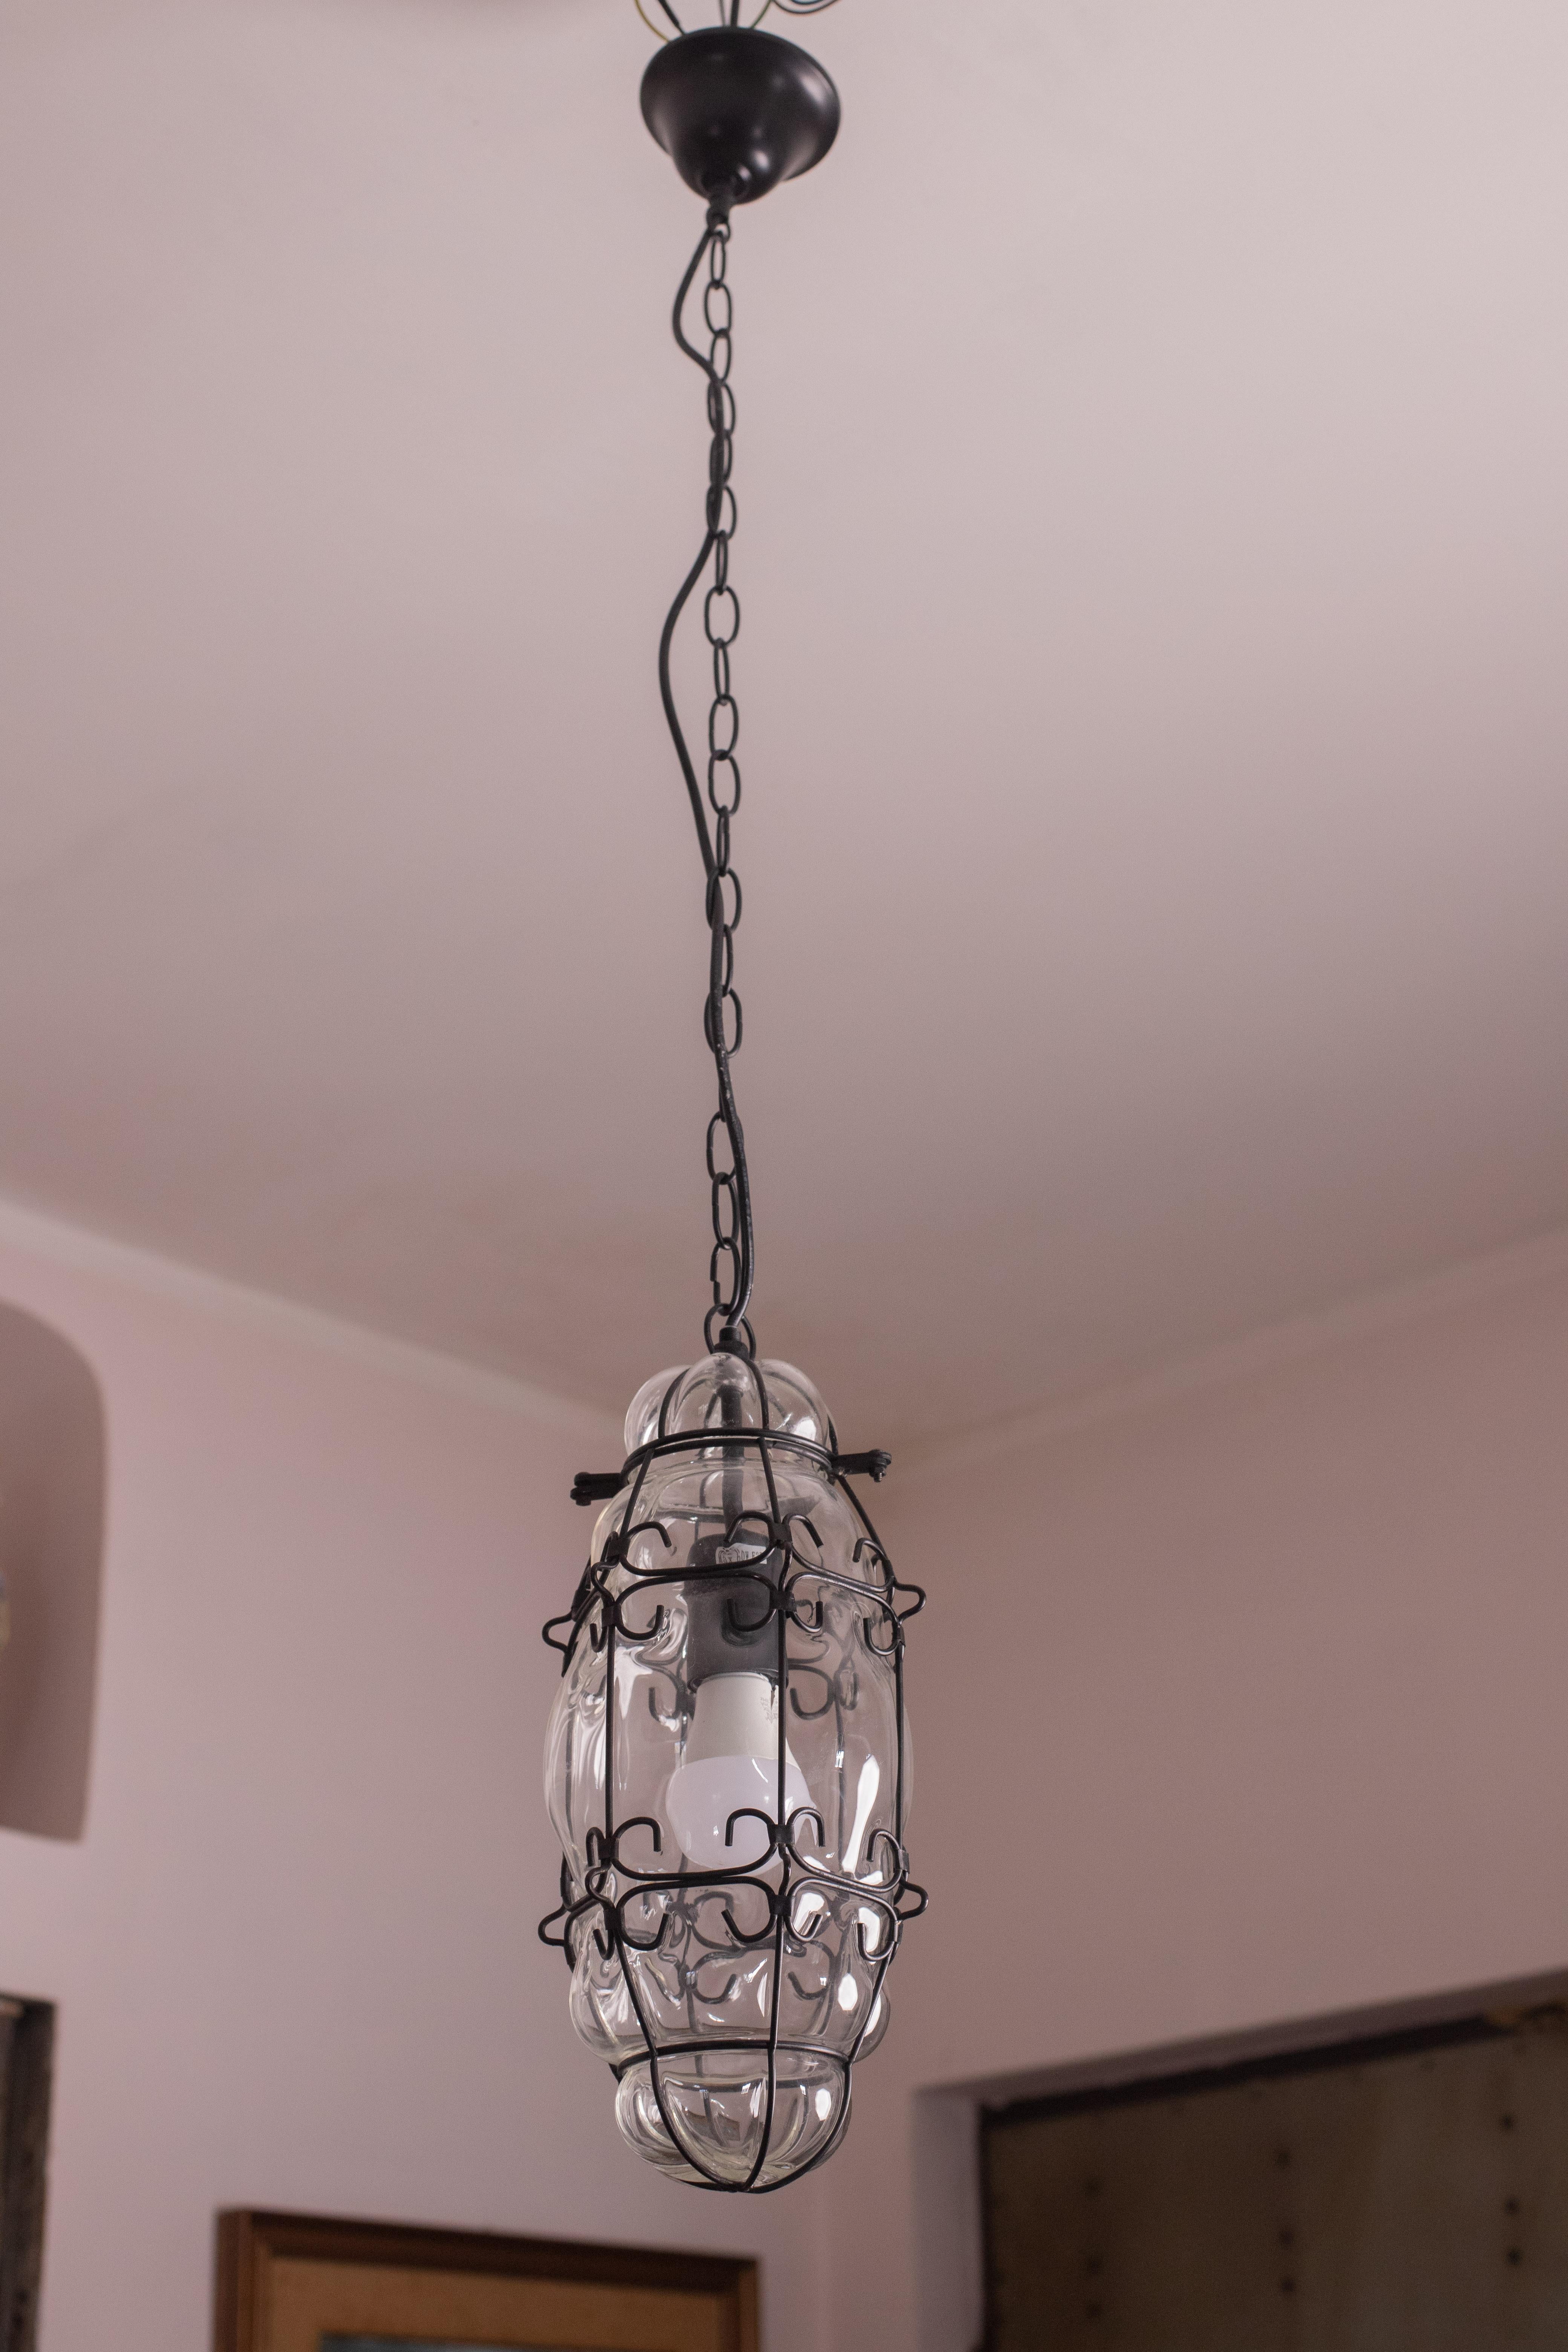 Three beautiful lights for hallways, entrances and living rooms.
As always, these beautiful lanterns create their own magic and show incredible craftsmanship.

The lantern is composed of mesh patterned glass, blown inside a wire cage, with a